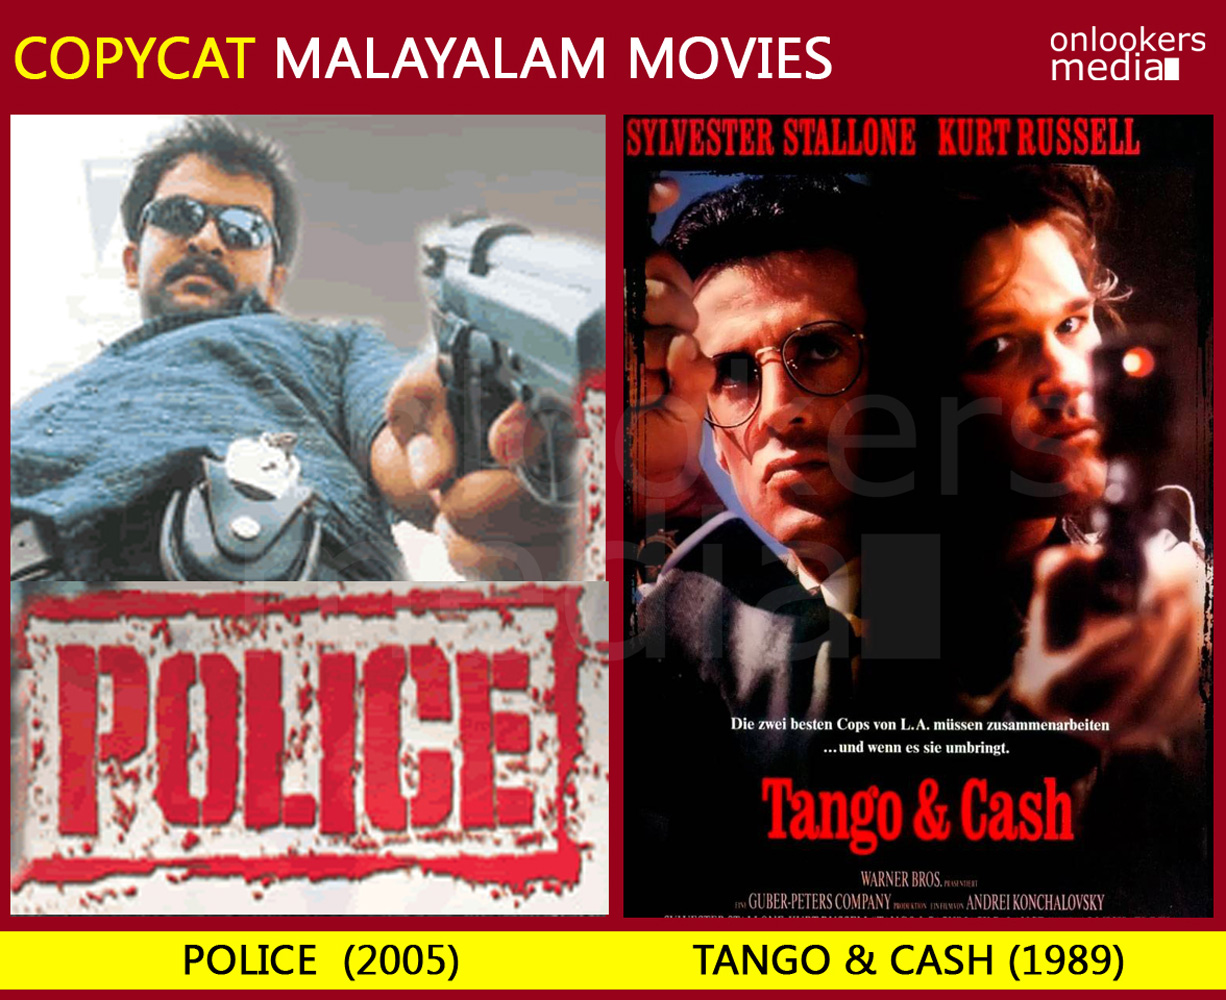 Police Malayalam movie copied from Tango and Cash-Copycat Malayalam Movie-Onlookers Media